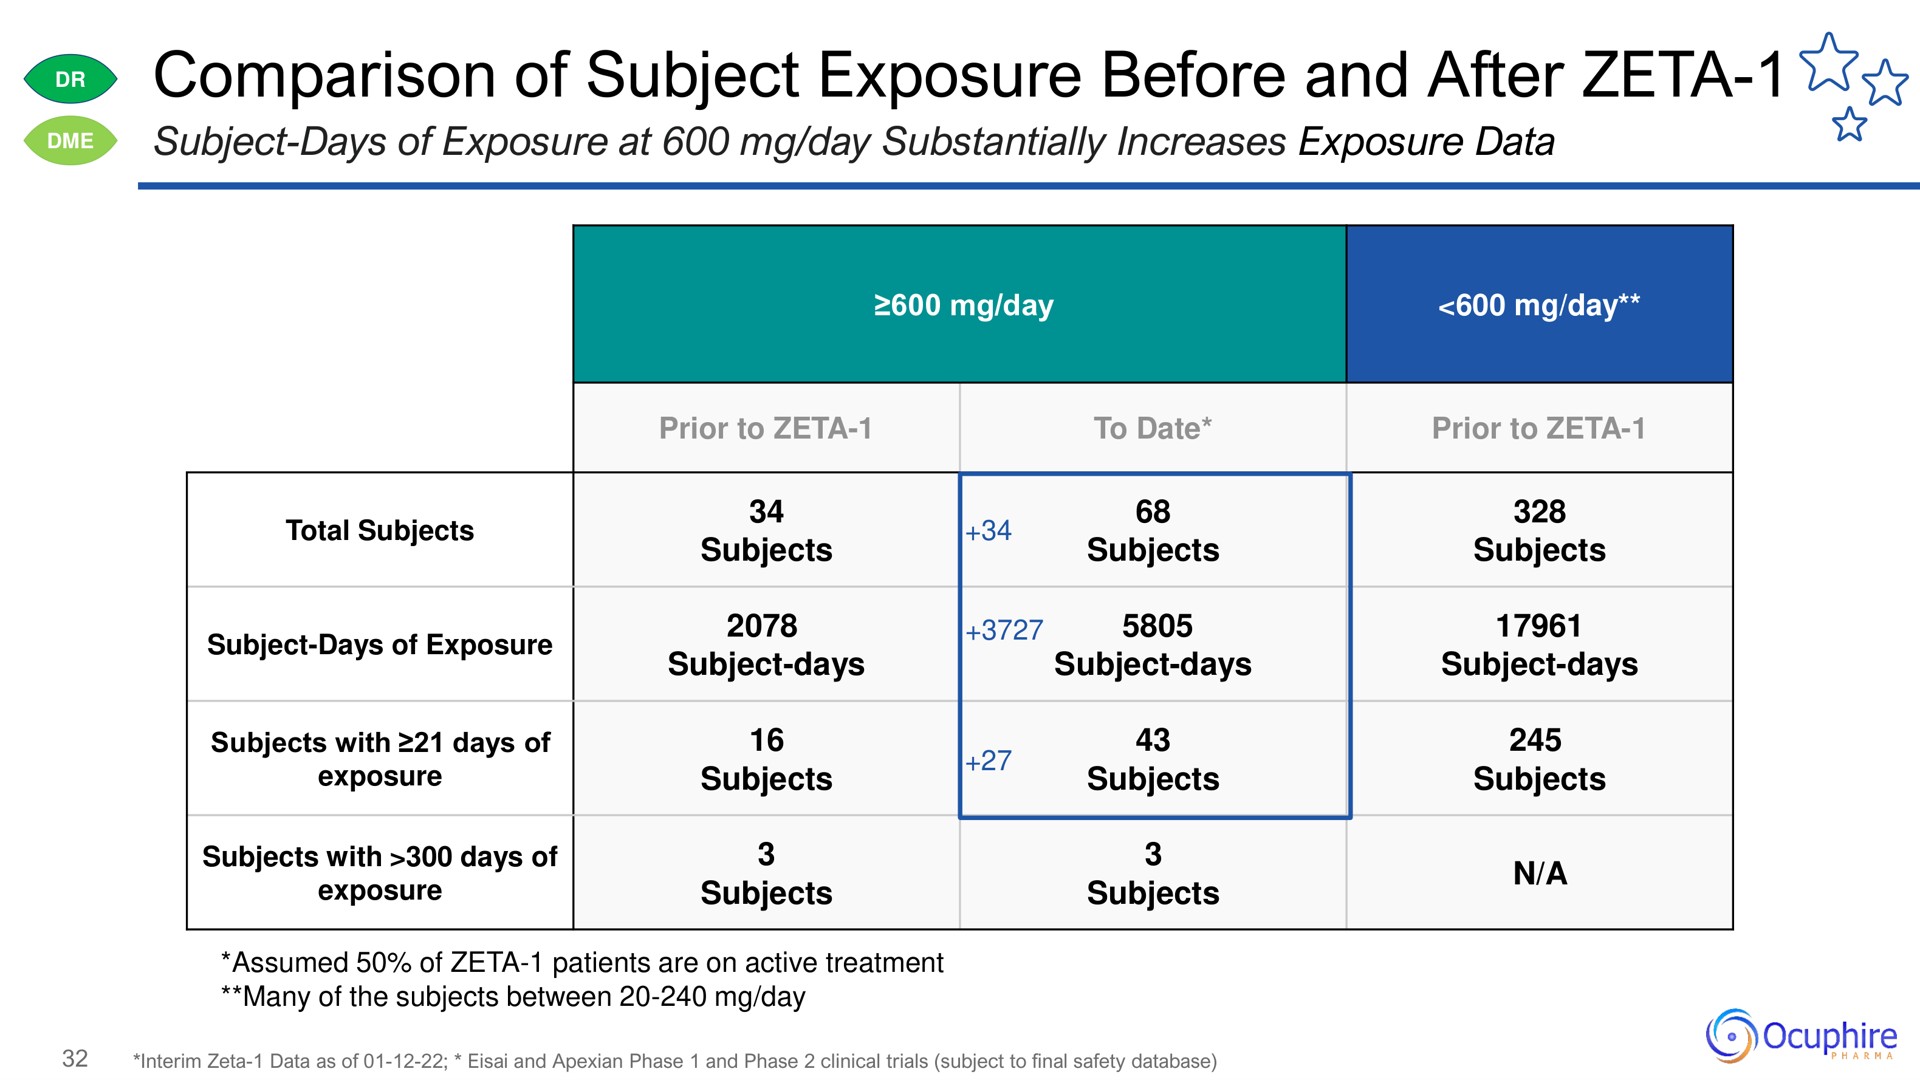 comparison of subject exposure before and after zeta subjects | Ocuphire Pharma